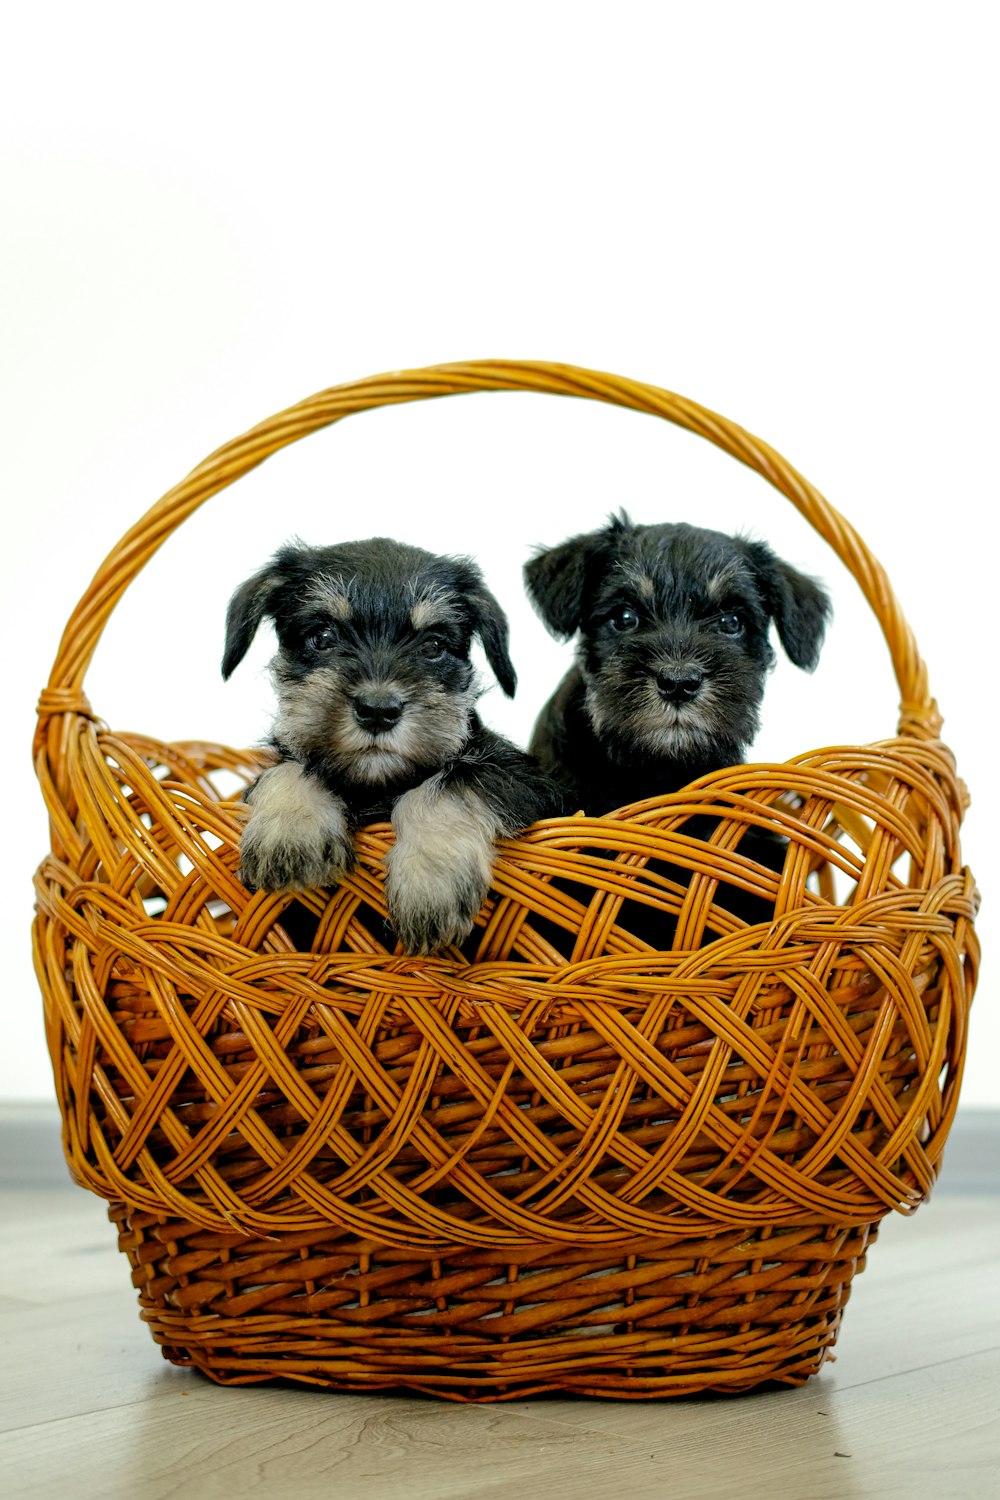 two small dogs sitting in a wicker basket